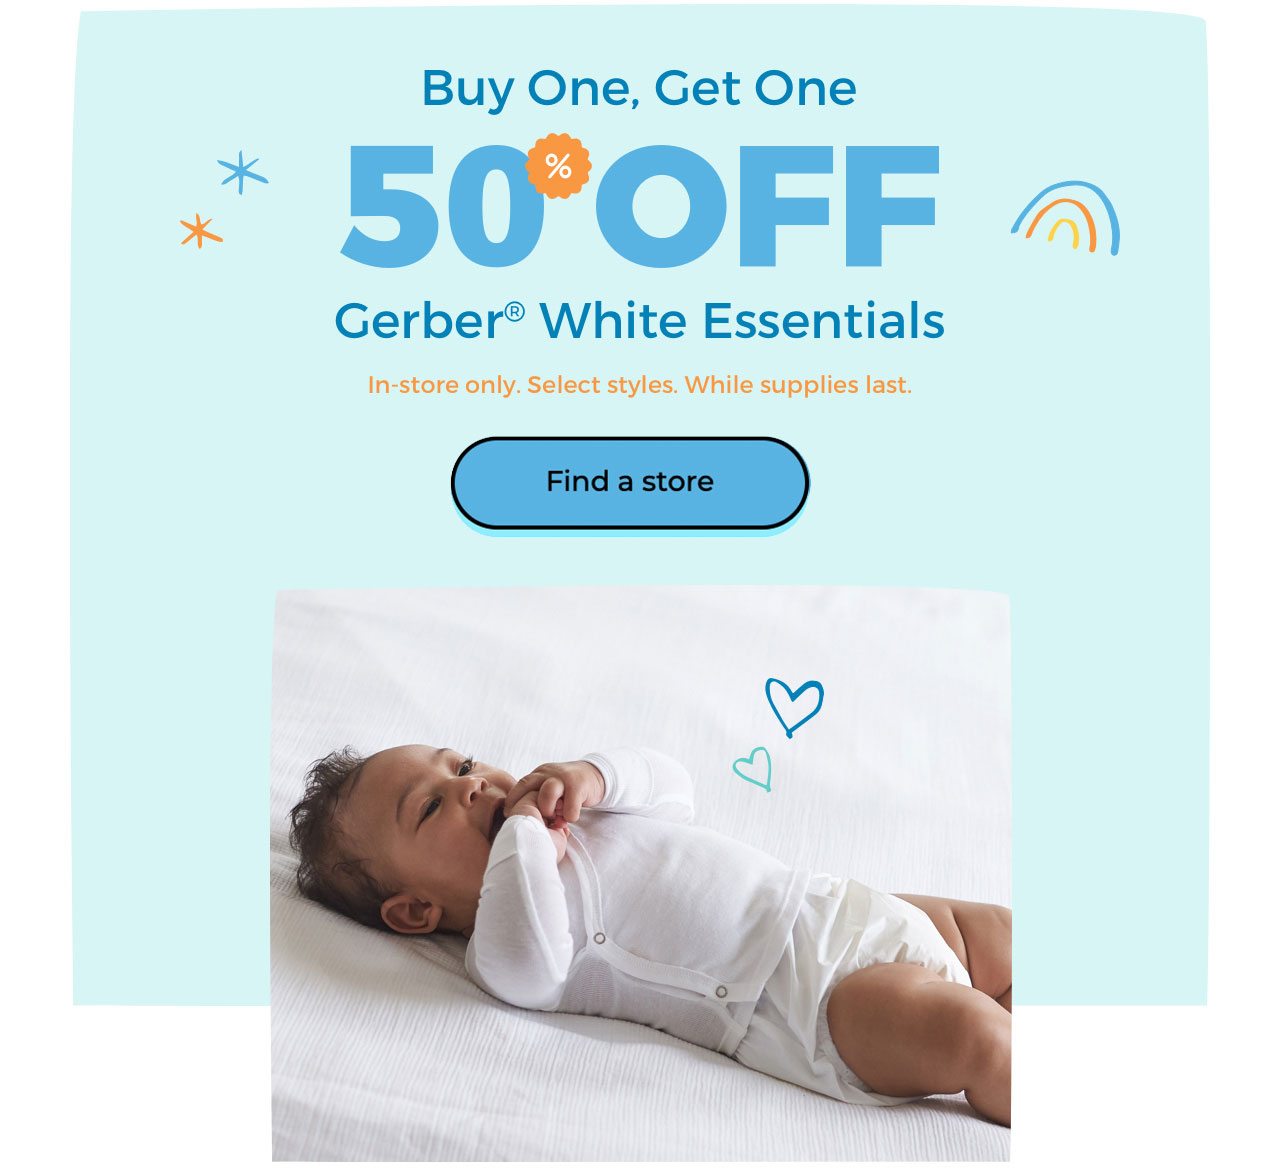 Buy One, Get One. 50% OFF Gerber® White Essentials. In-store only. Select styles. While supplies last. Find a store